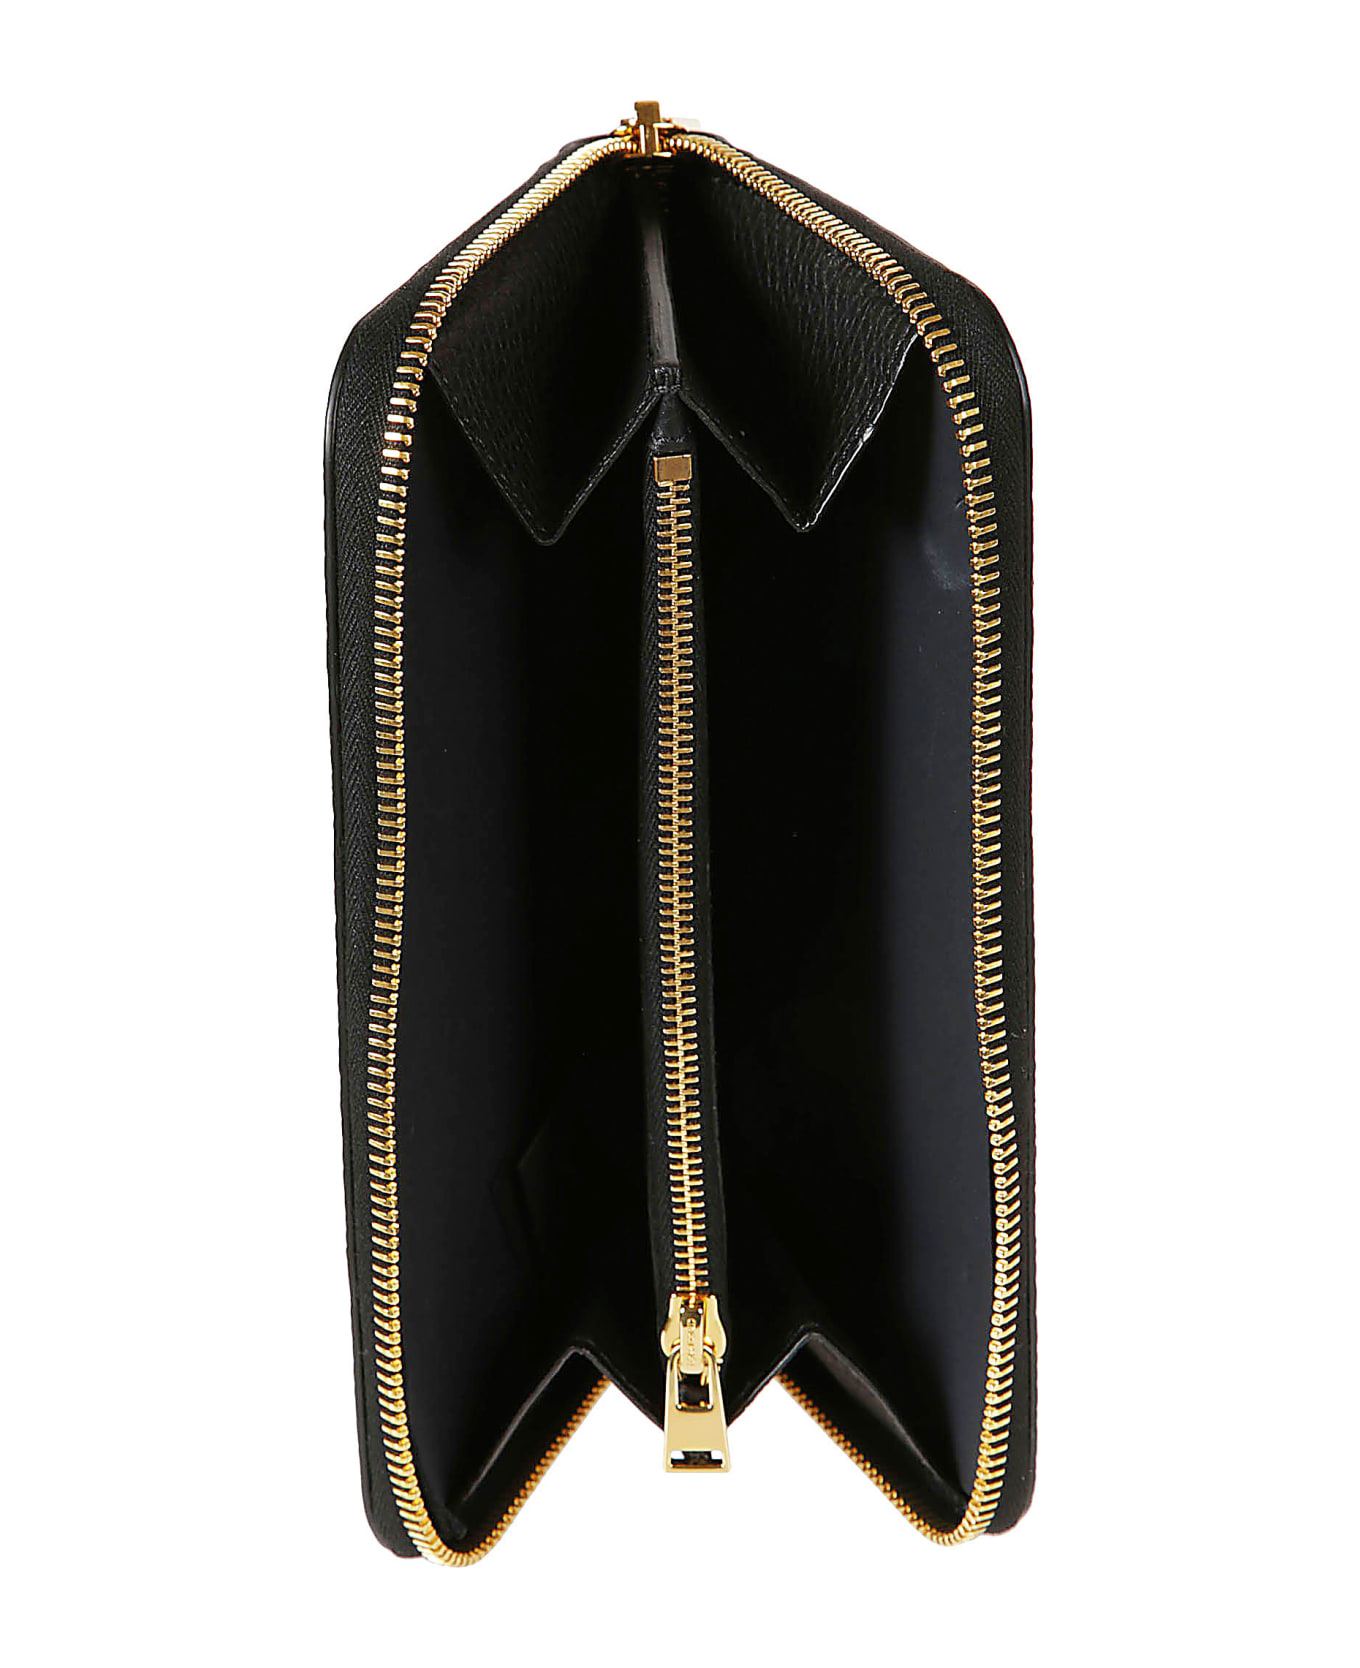 Tom Ford Grained Leather Zip-around Wallet - Black